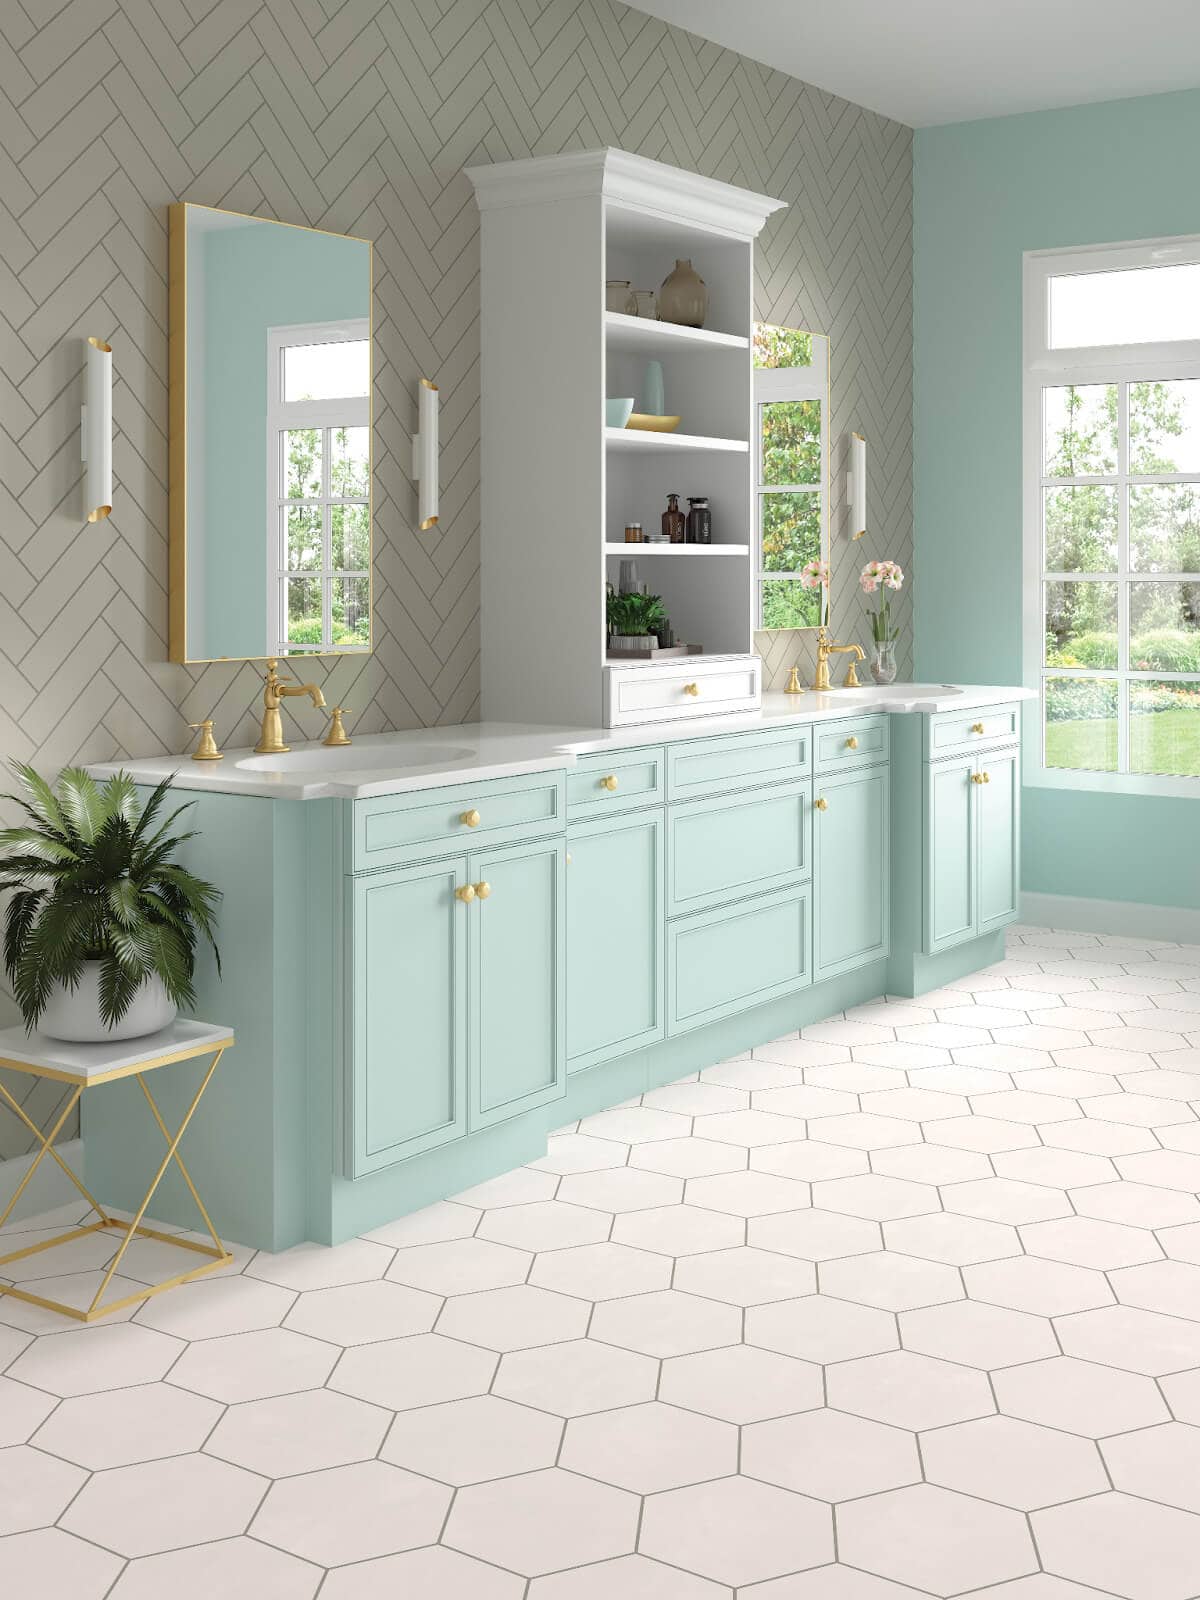 Spacious bathroom with blue and green drawers and greige herringbone tile in a matte finish